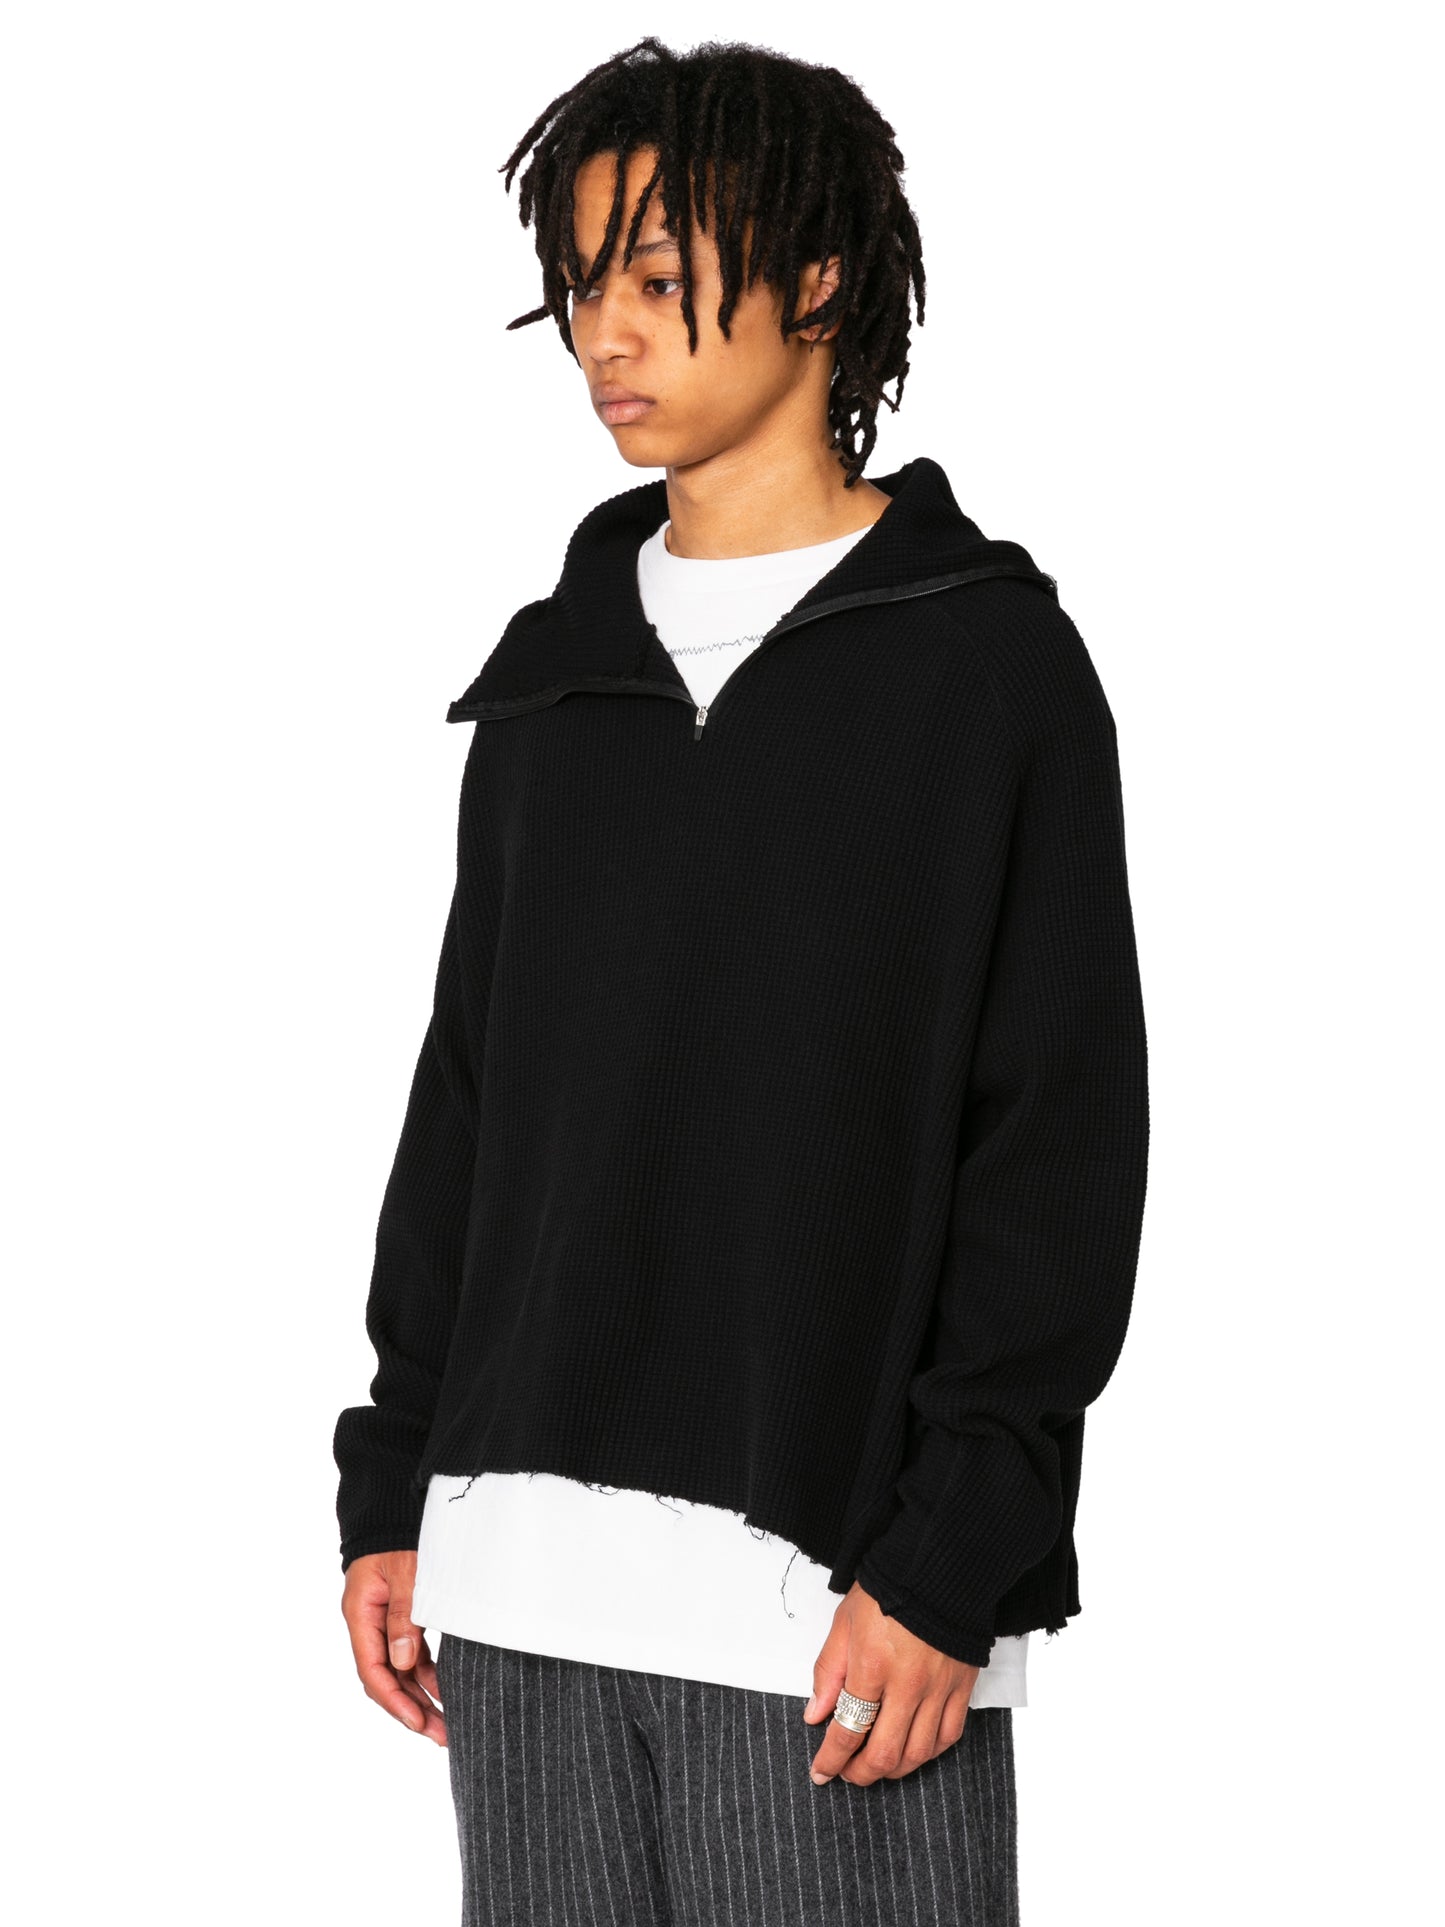 ORGANIZED H.ZIP  PULLOVER TOP
/ C.THERMAL